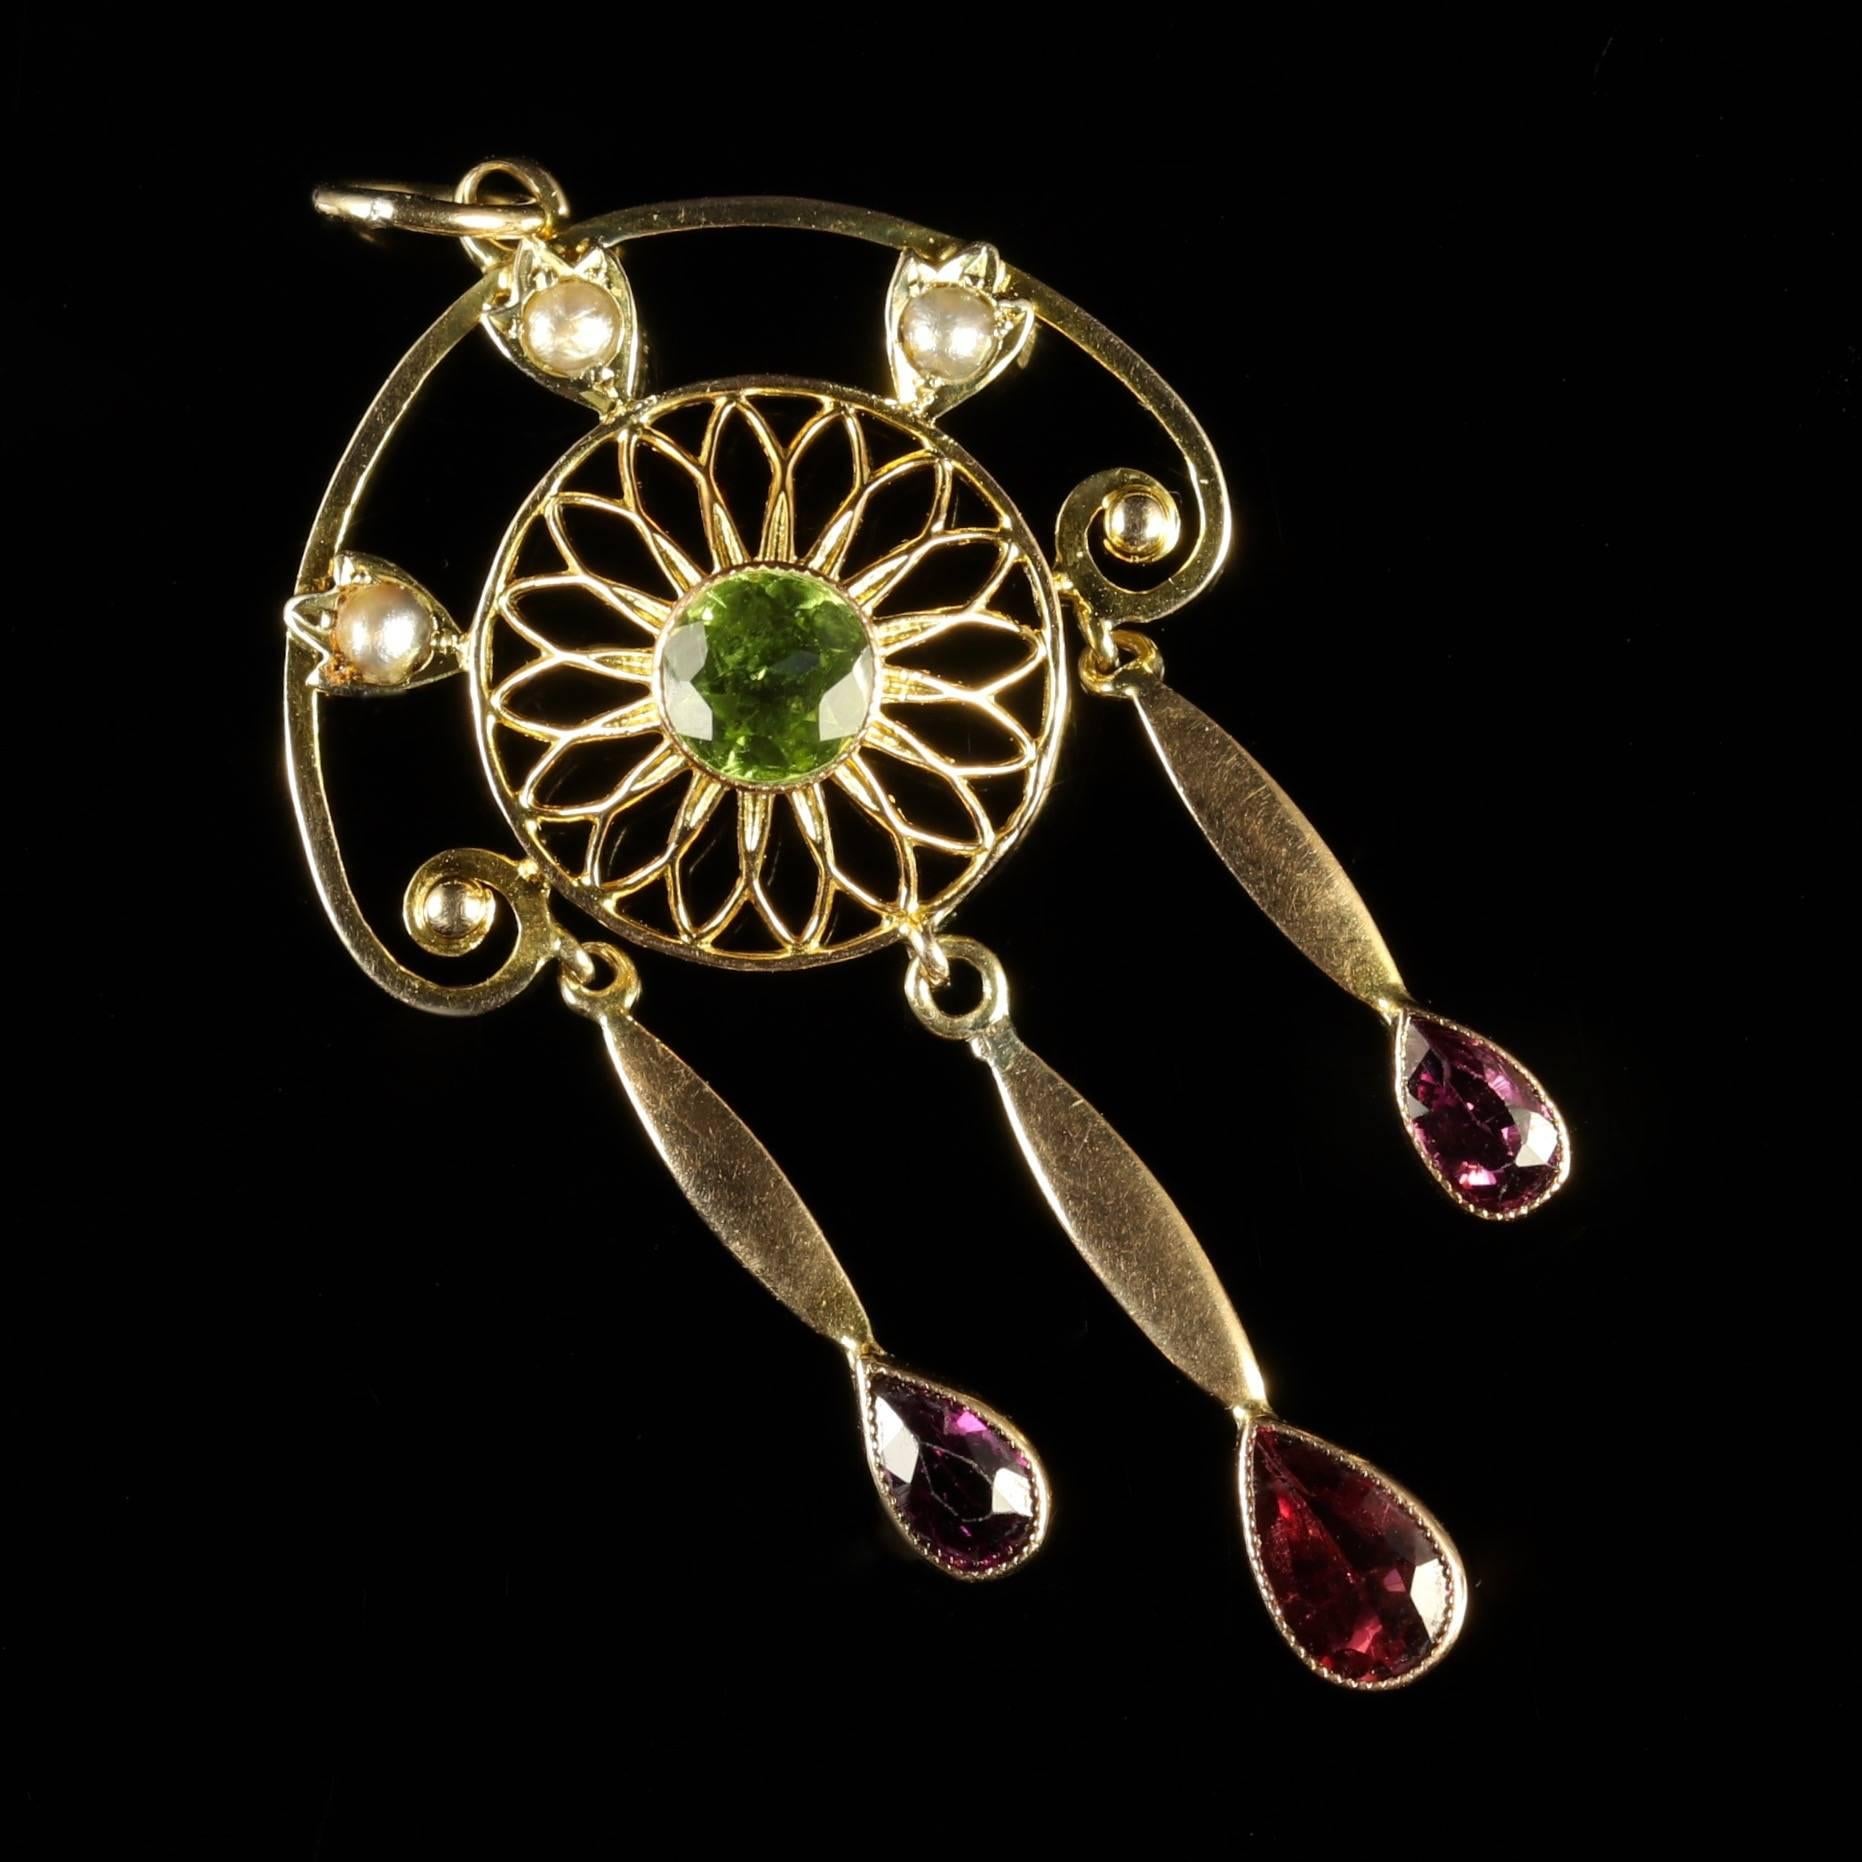 This genuine Victorian Suffragette pendant set in 9ct Gold, Circa 1900.

The wonderful pendant is decorated in creamy Pearls and adorned with a 0.60ct Peridot in the centre, finishing with three fabulous Amethyst pendant droppers.

Emmeline